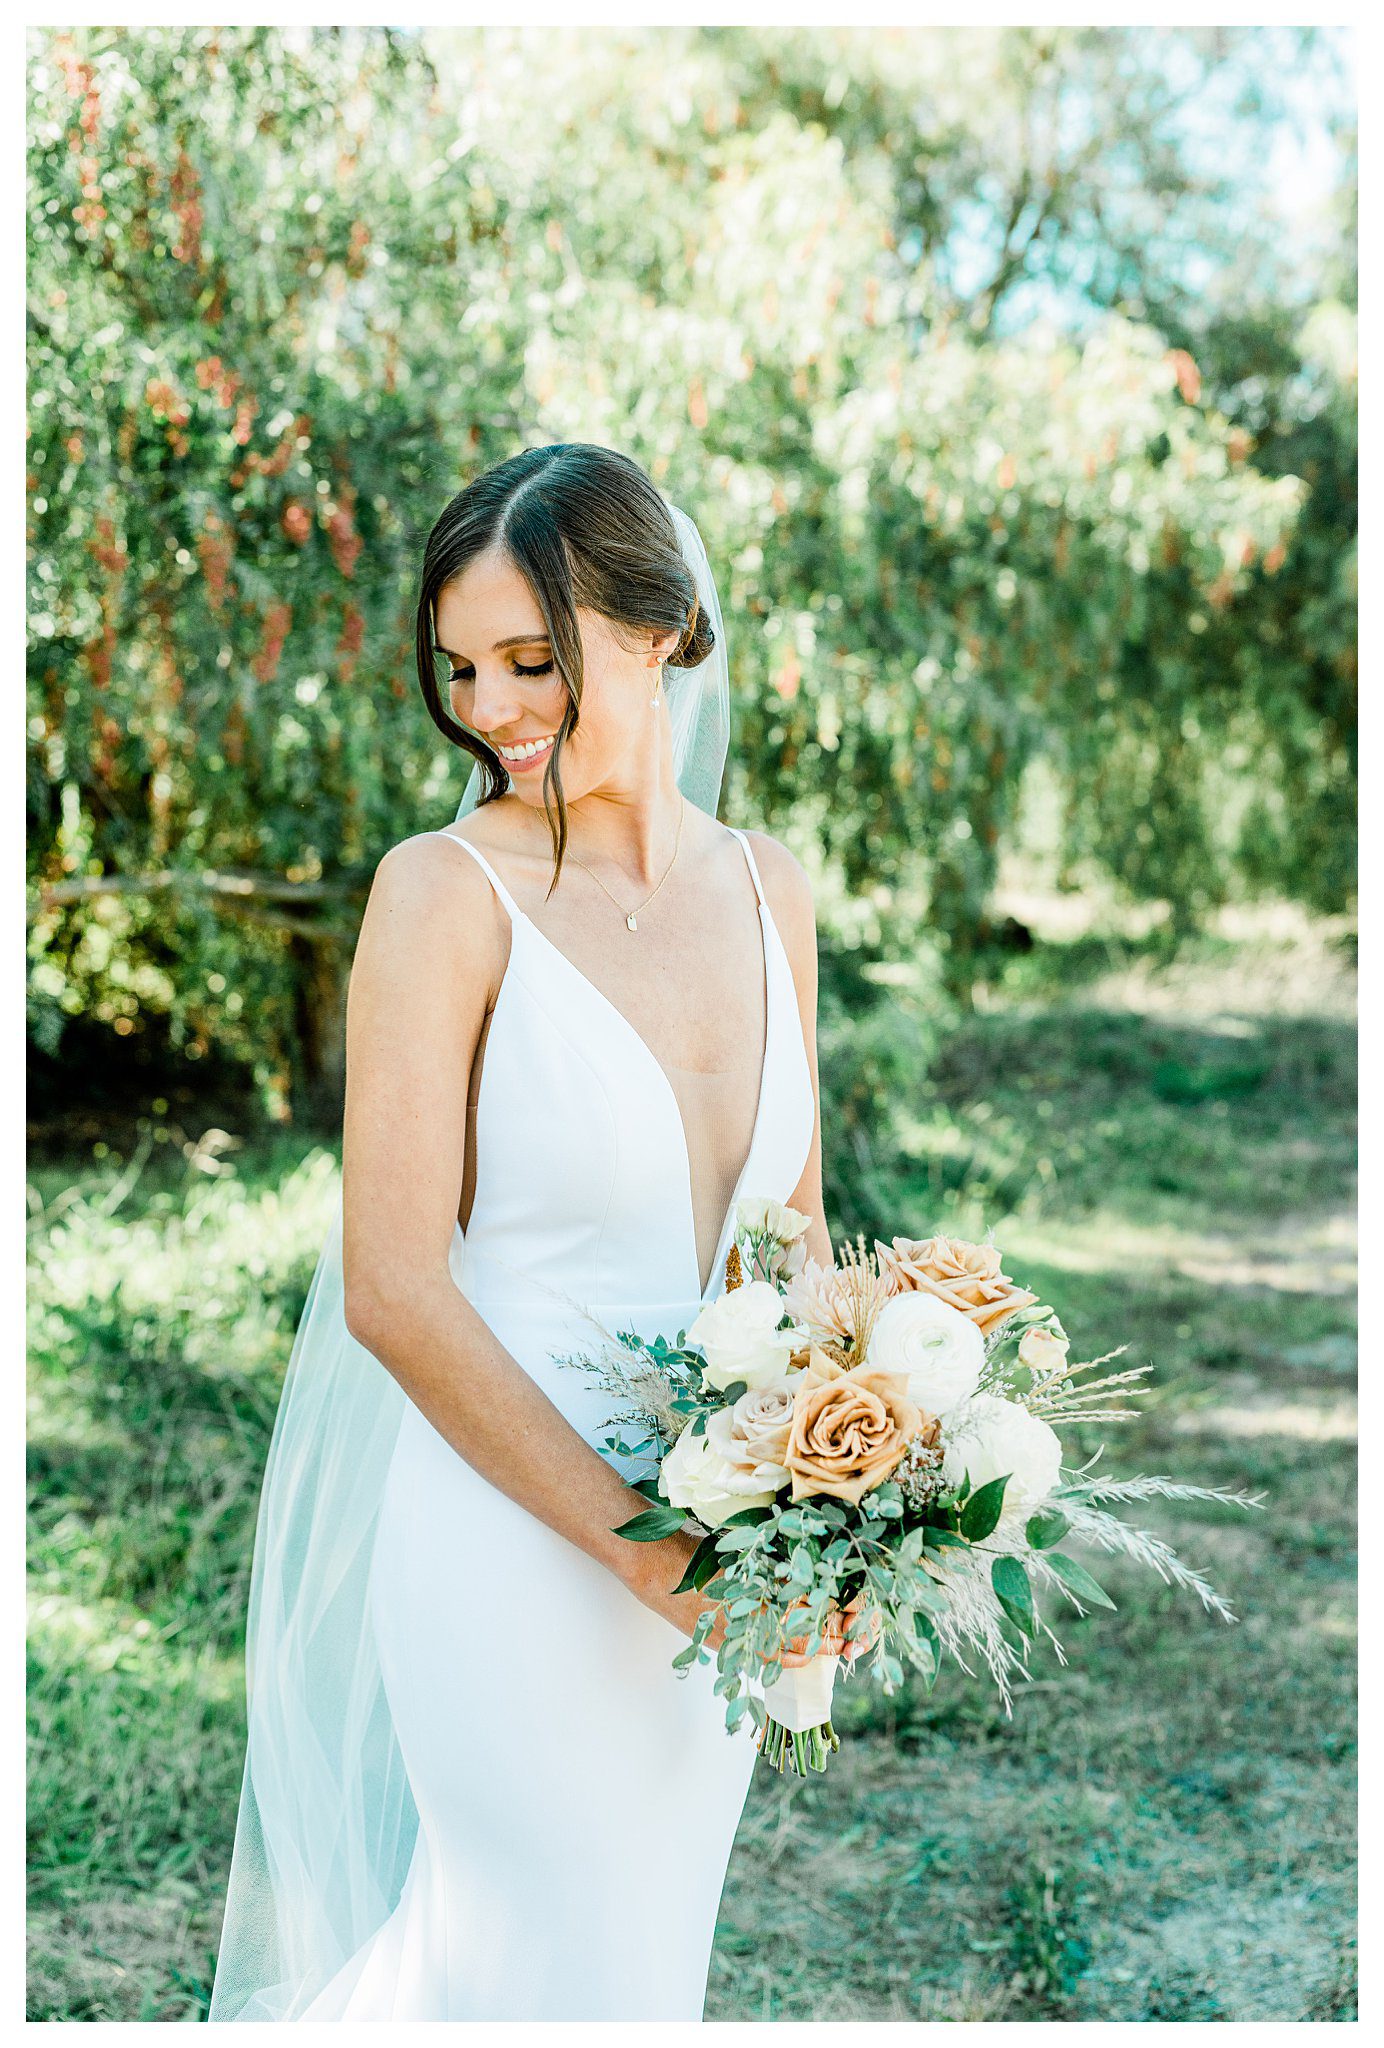 A bride at her Slo Brew Rock wedding in San Luis Obispo holding her boho bouquet of flowers.